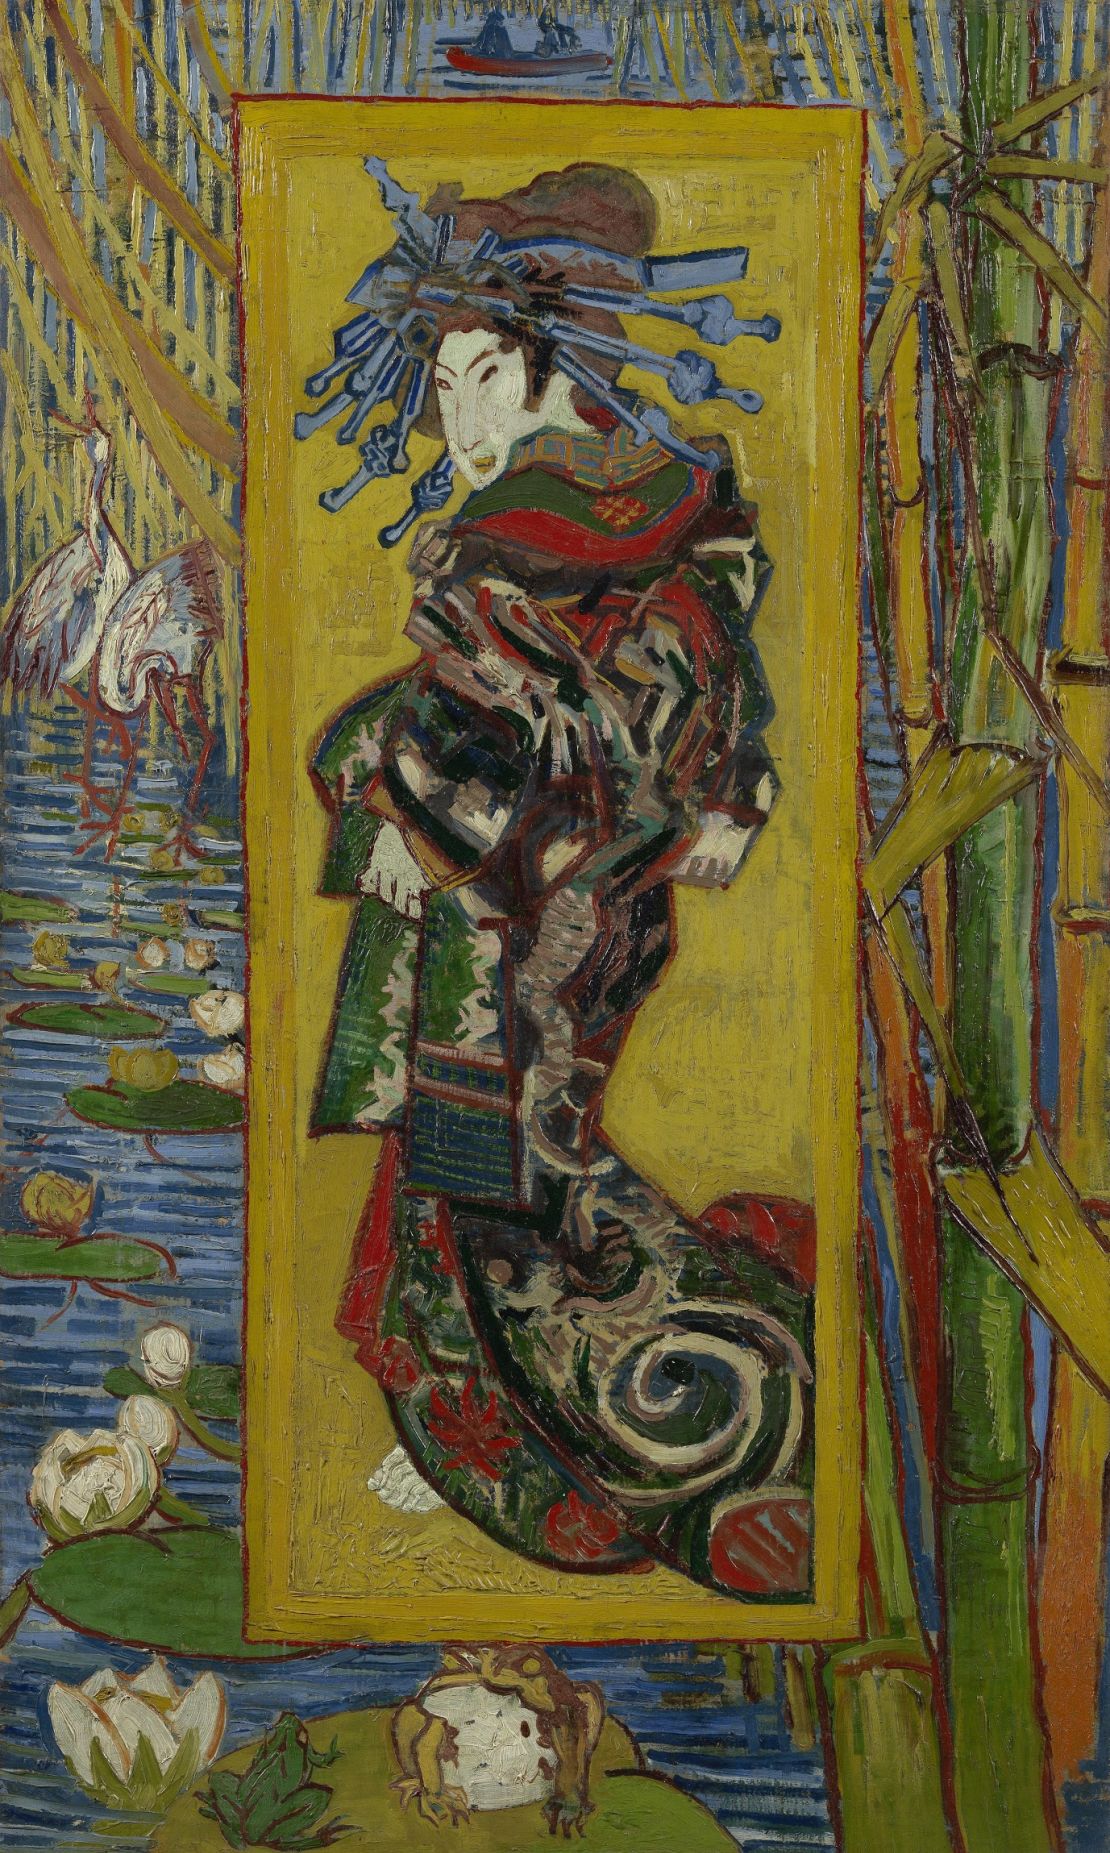 The bold colors and outlines found in Van Gogh's "Courtesan (after Eisen)" shows the influence of Japanese woodblock prints.